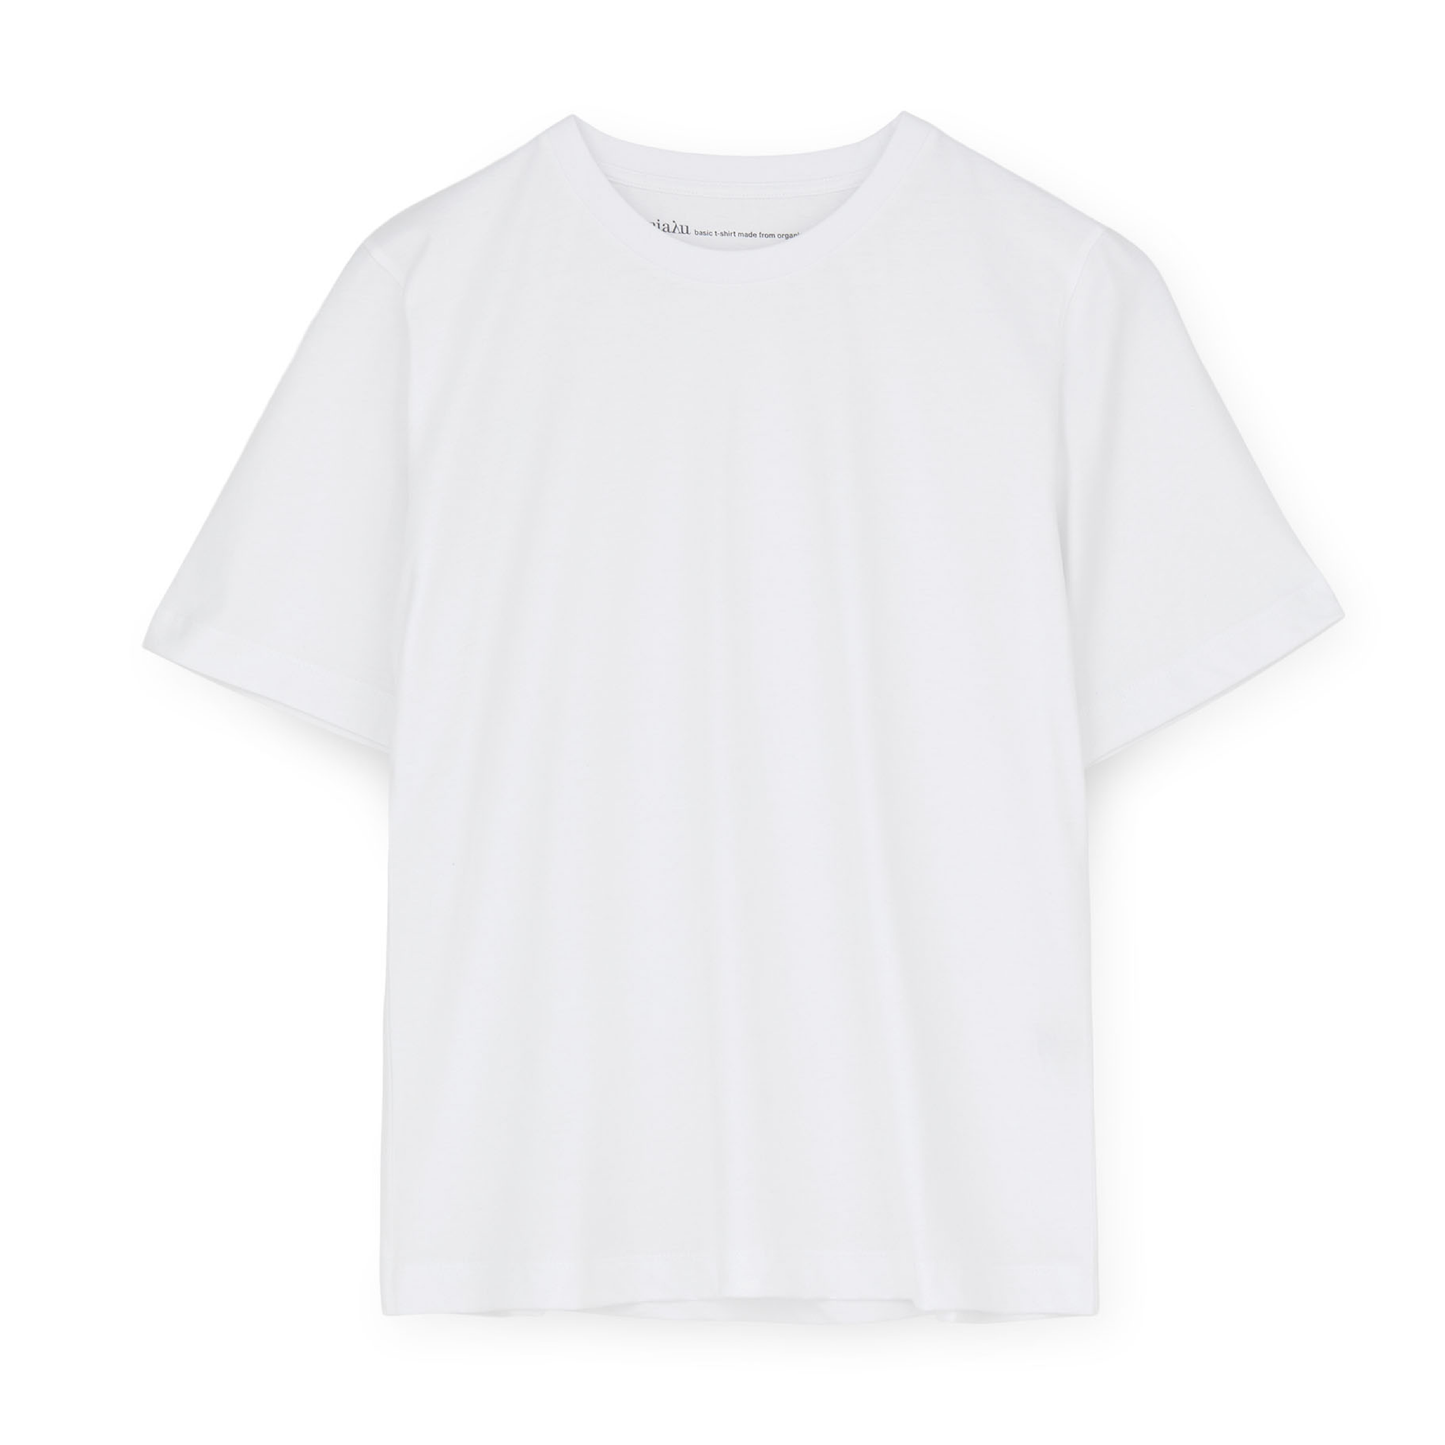 Short Sleeve Two Pack T-Shirts, White & Undyed